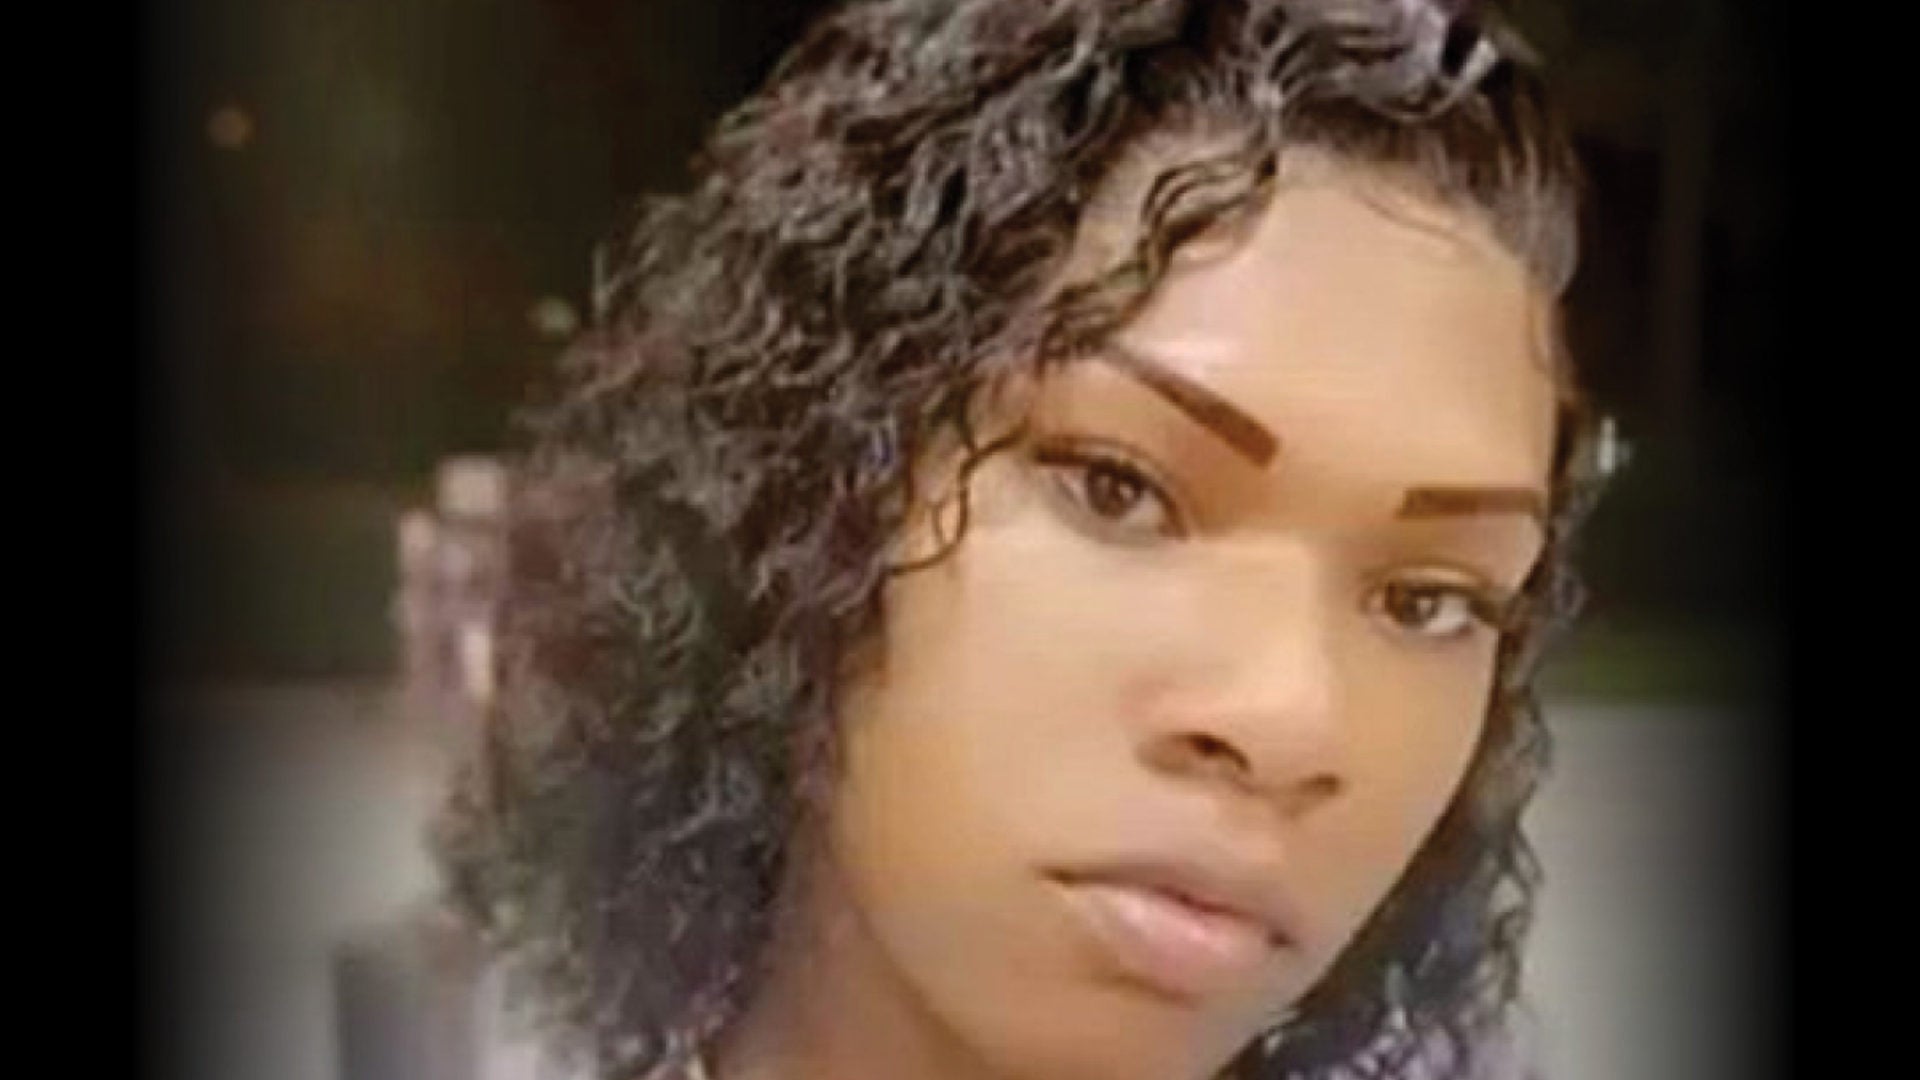 Police ID Suspect In Case Of Black Trans Woman Found In Burning Car